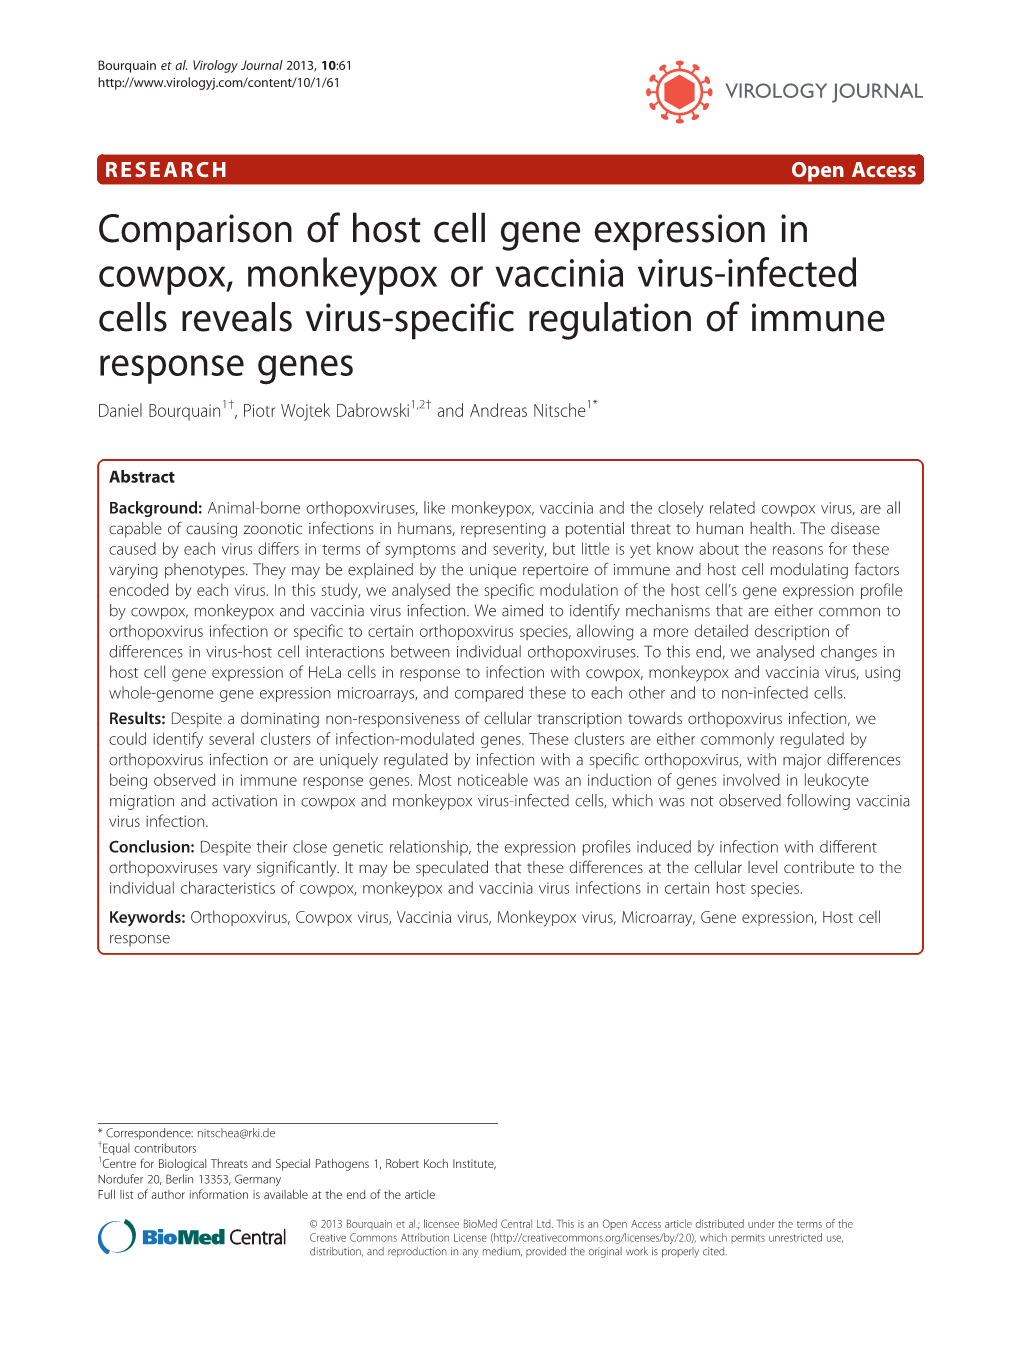 Comparison of Host Cell Gene Expression in Cowpox, Monkeypox Or Vaccinia Virus-Infected Cells Reveals Virus-Specific Regulation